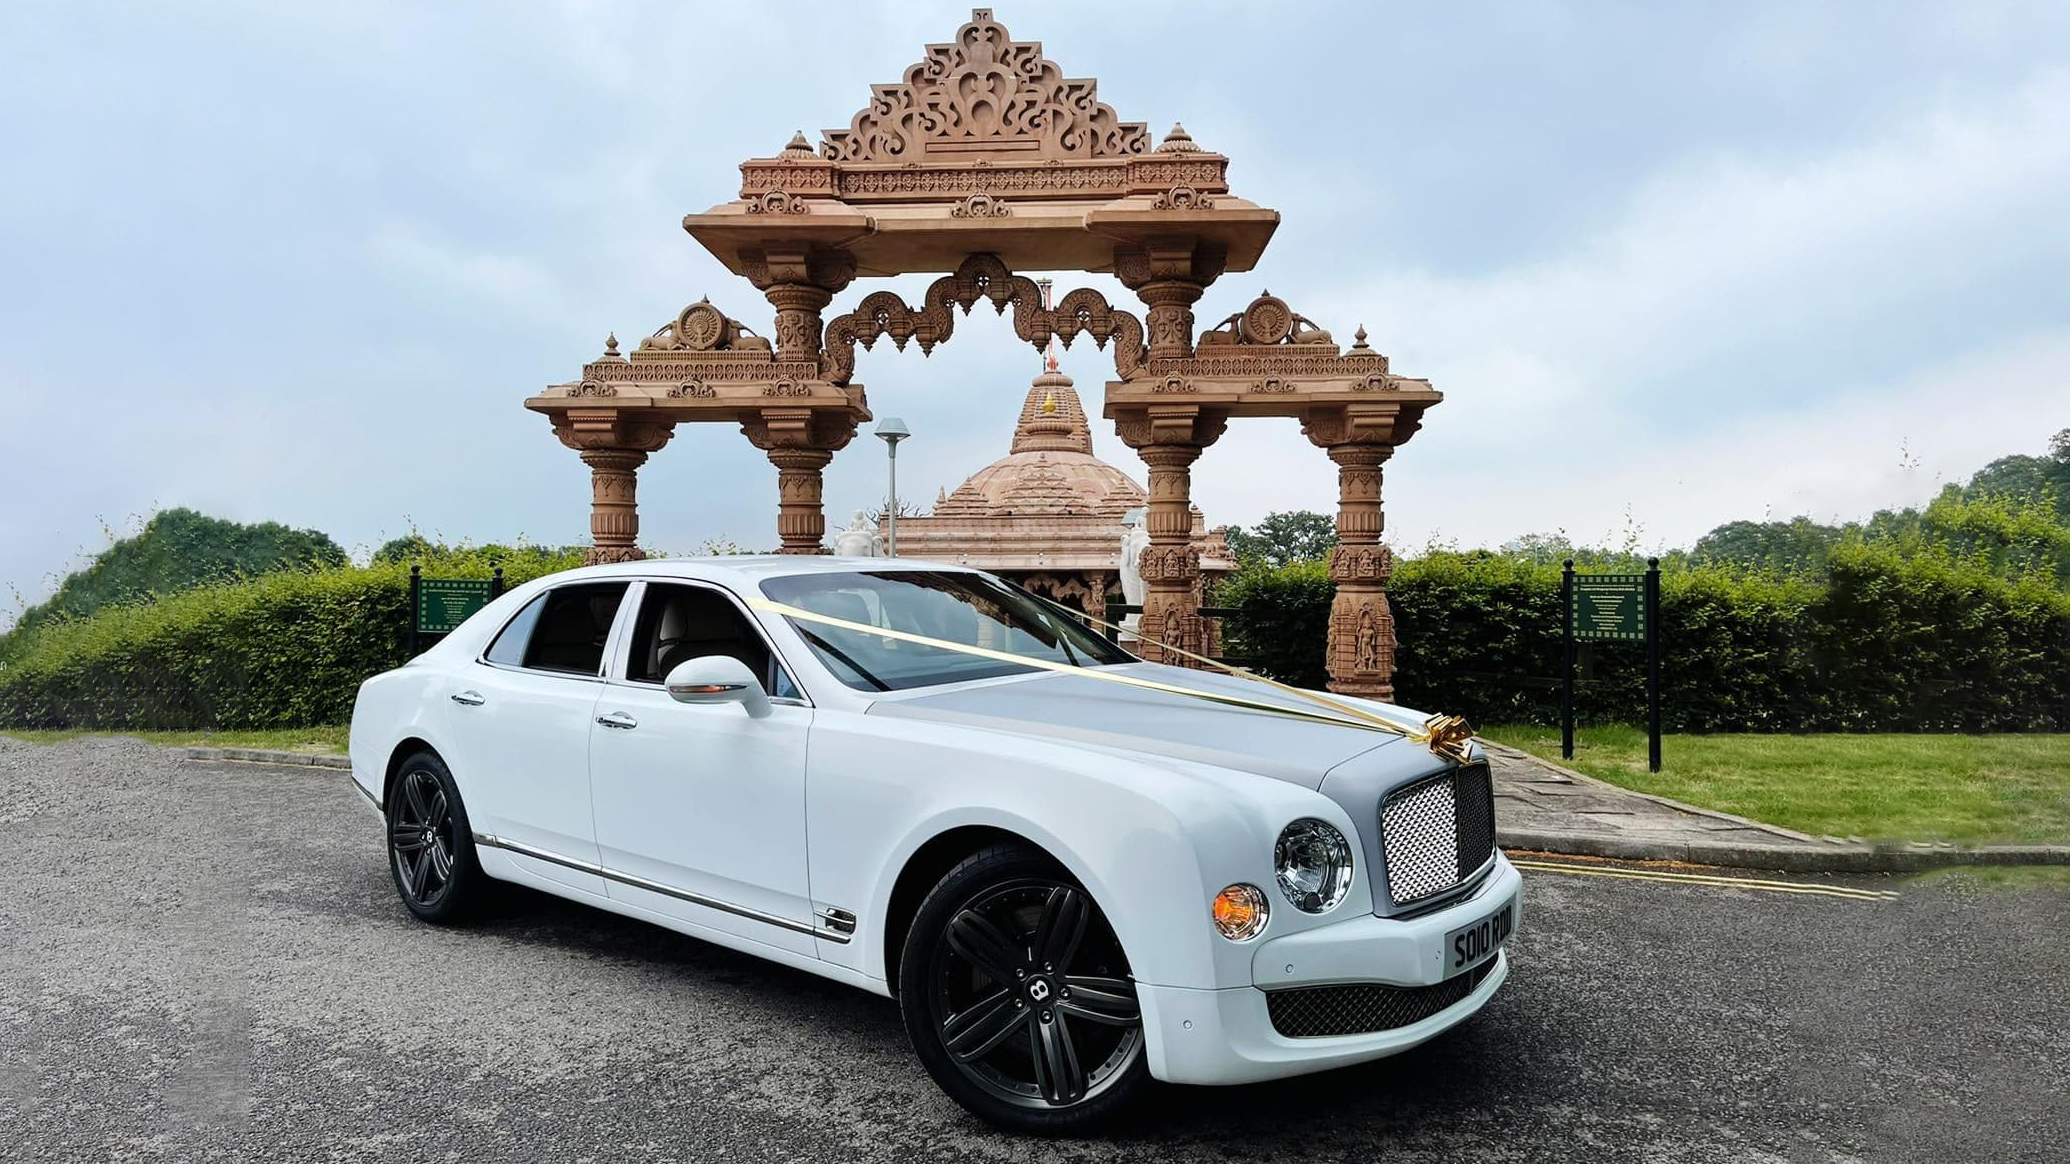 Modern Bentley Mulsanne with Black alloy wheels and Gold ribbons park in front of an Asian Temple in Luton.